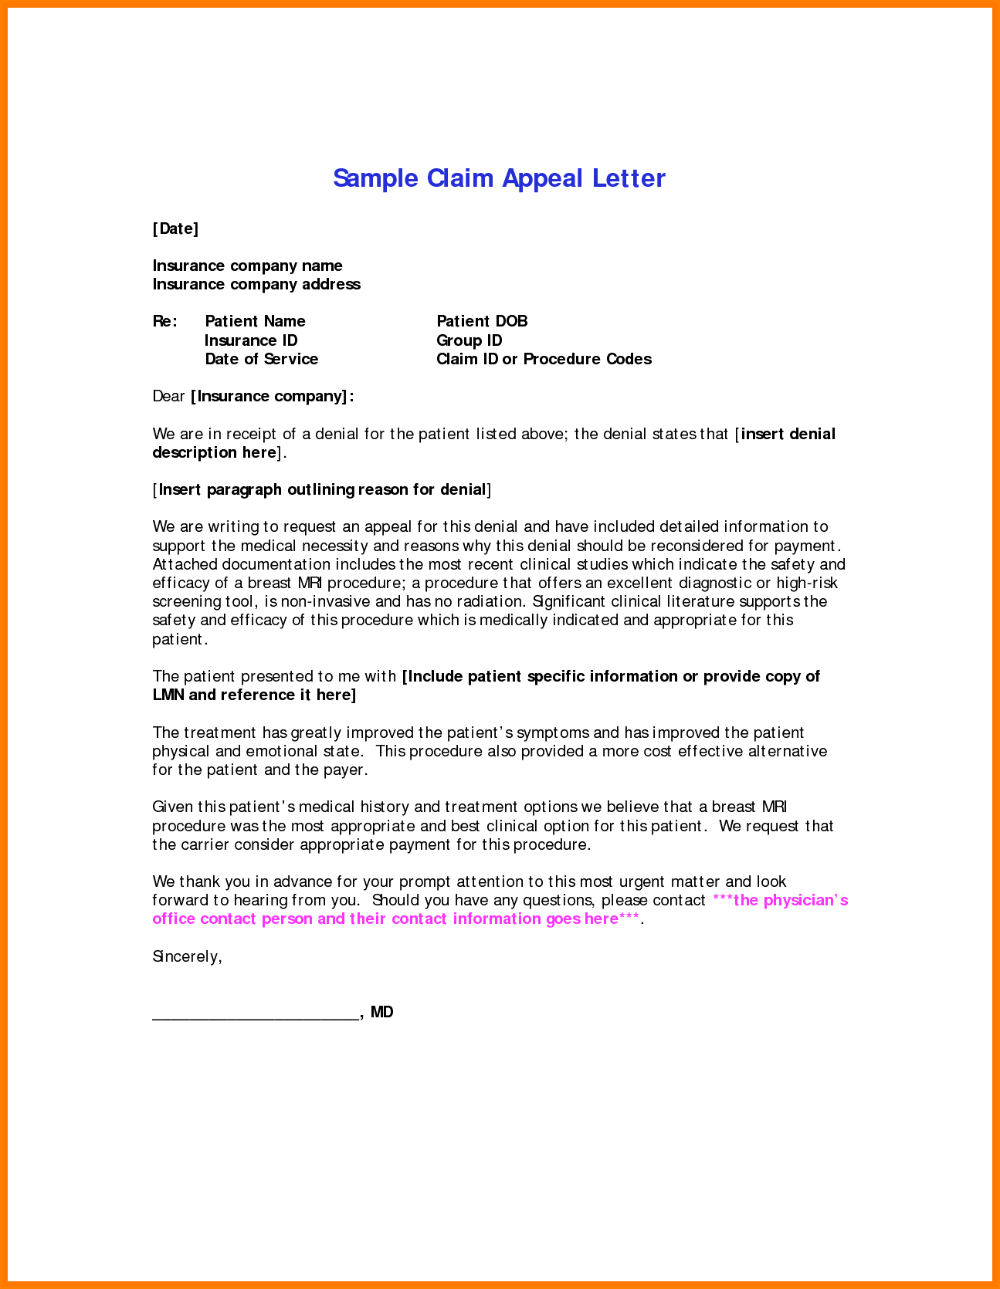 Template Ideas Insurance Denial Shocking Letter Claim Appeal intended for dimensions 1000 X 1289